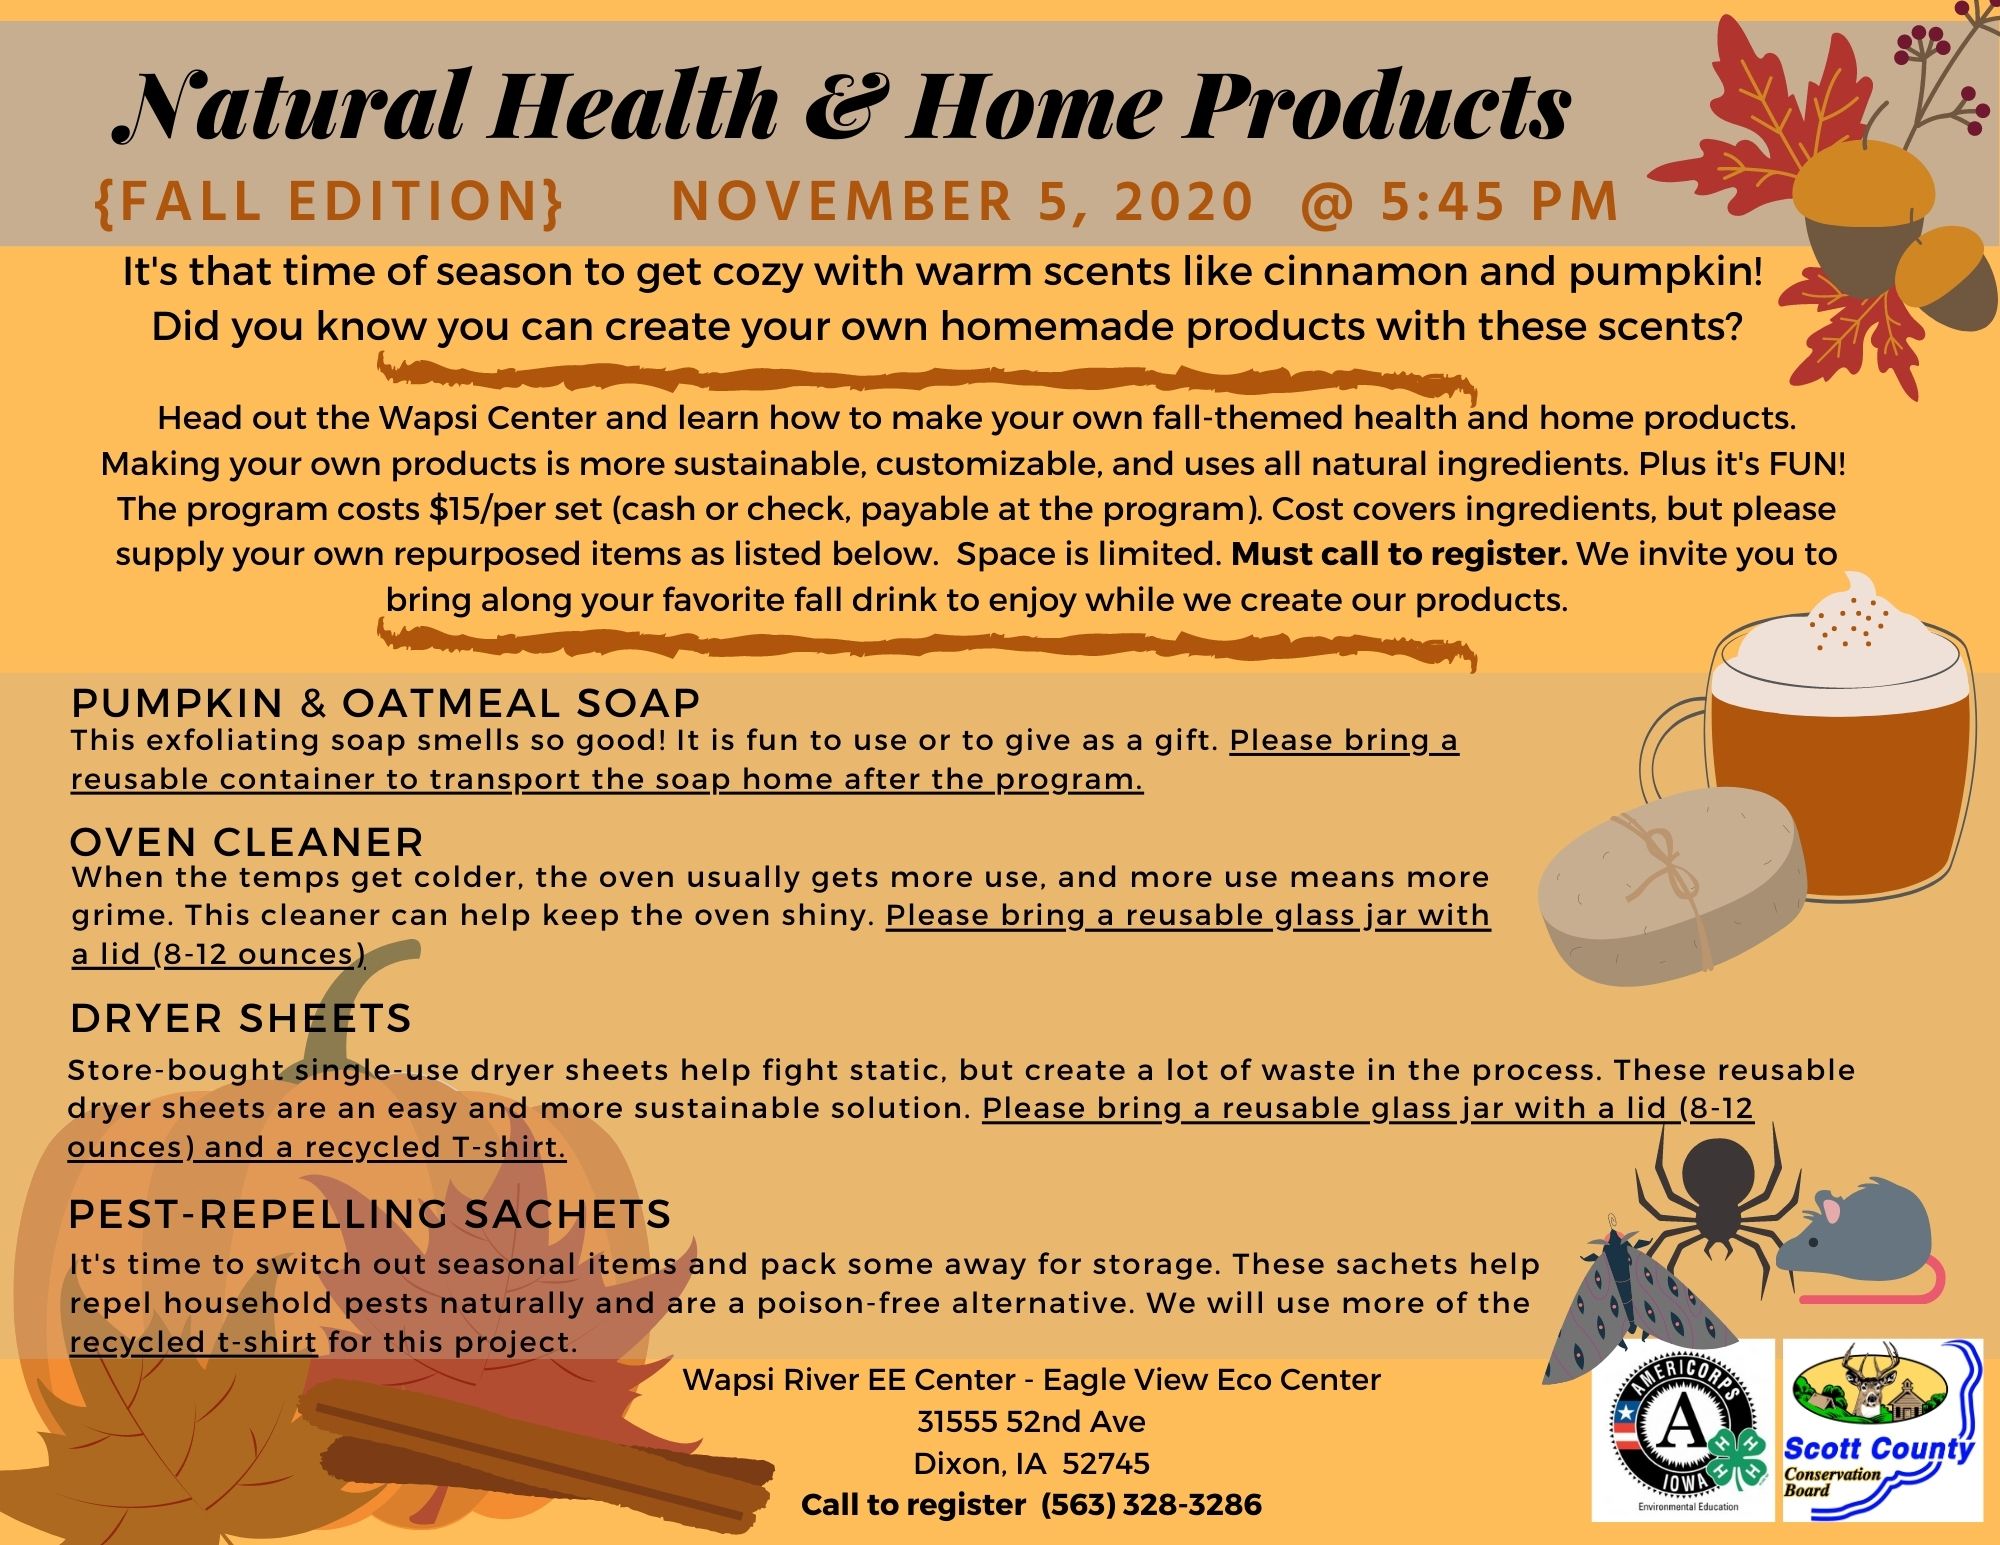 DIY Cleaning Supplies - Center for Environmental Health